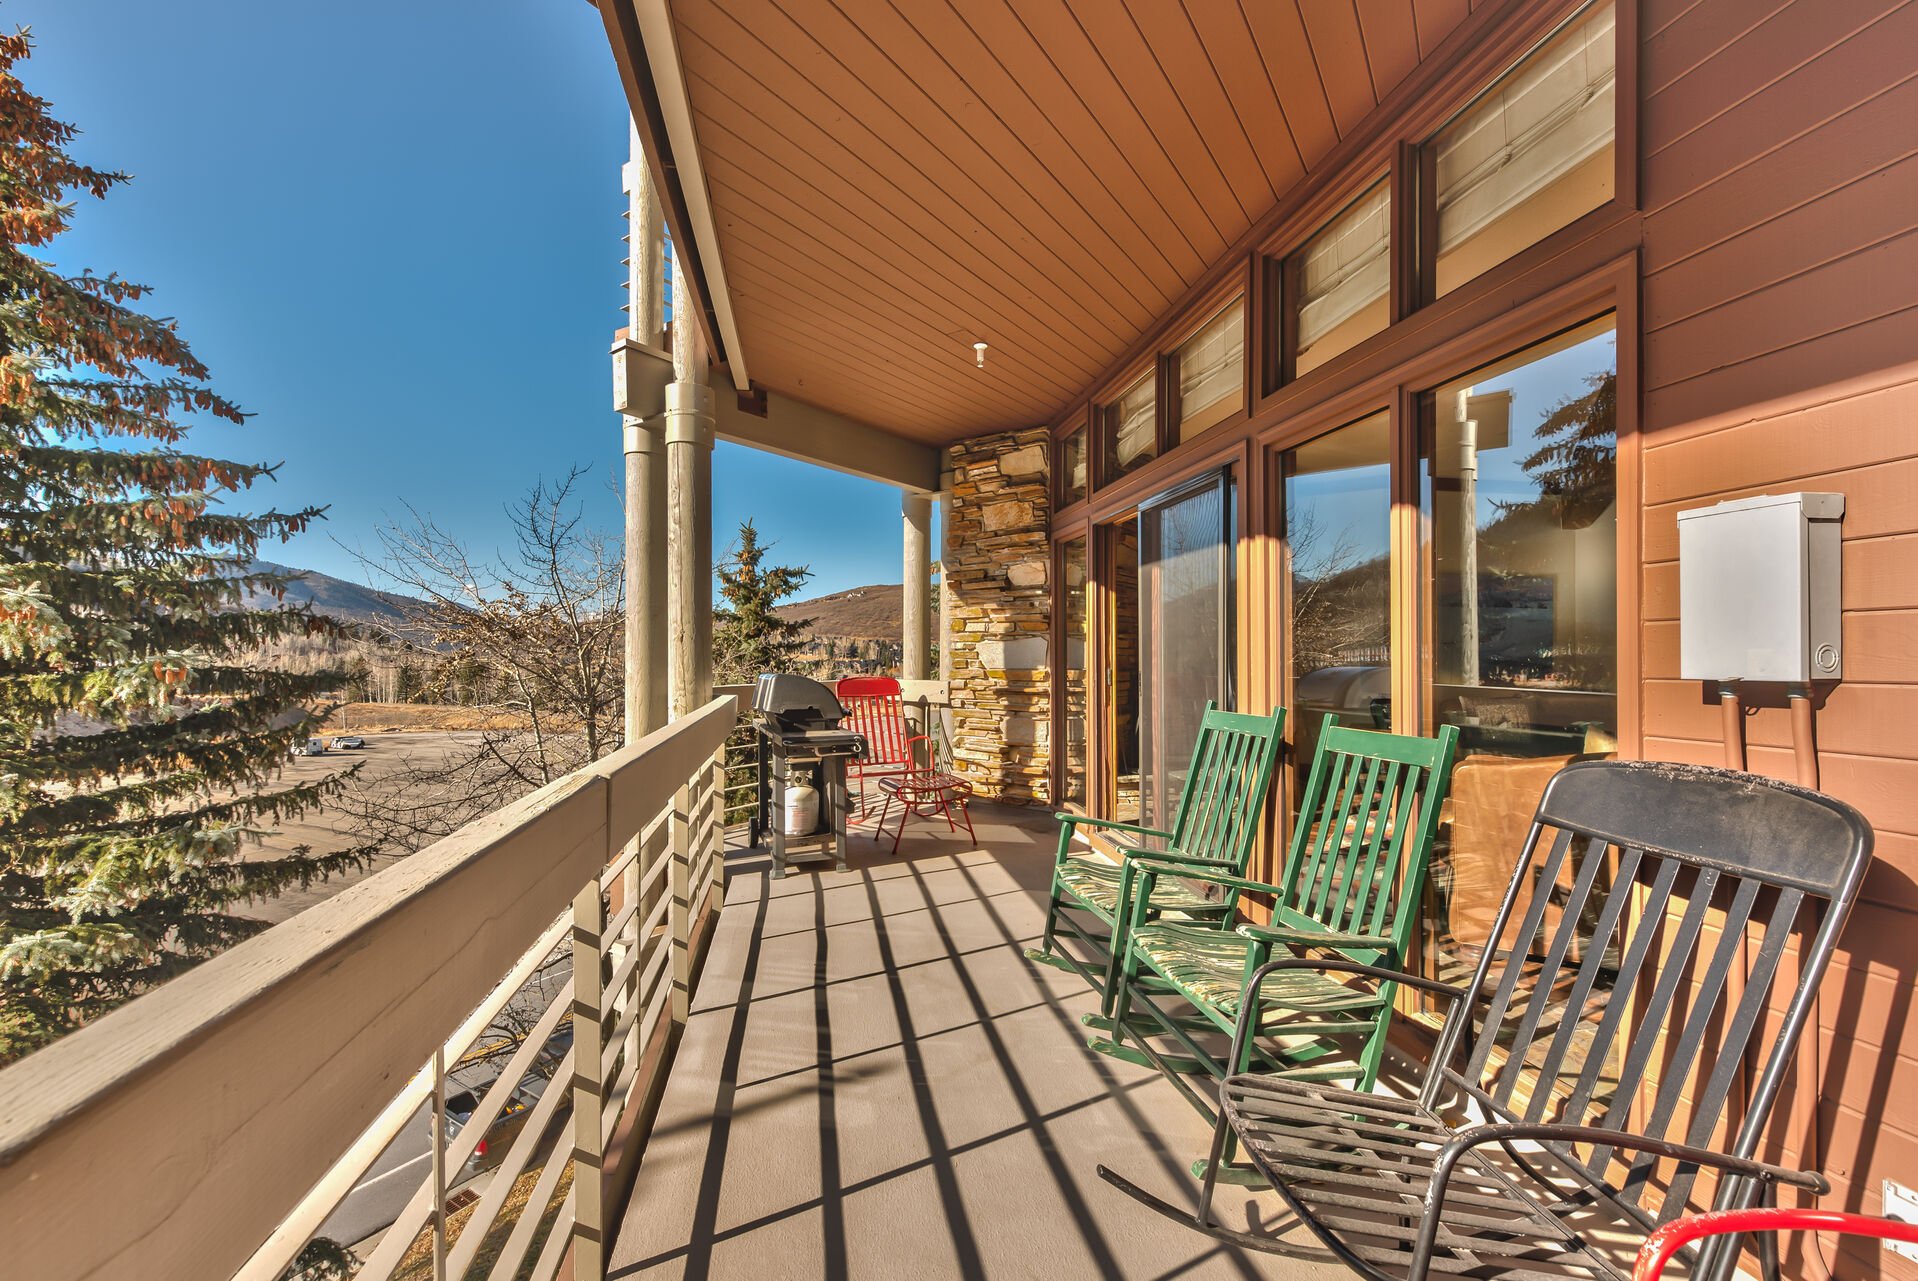 BBQ Grill and Patio Seating with Deer Valley Views